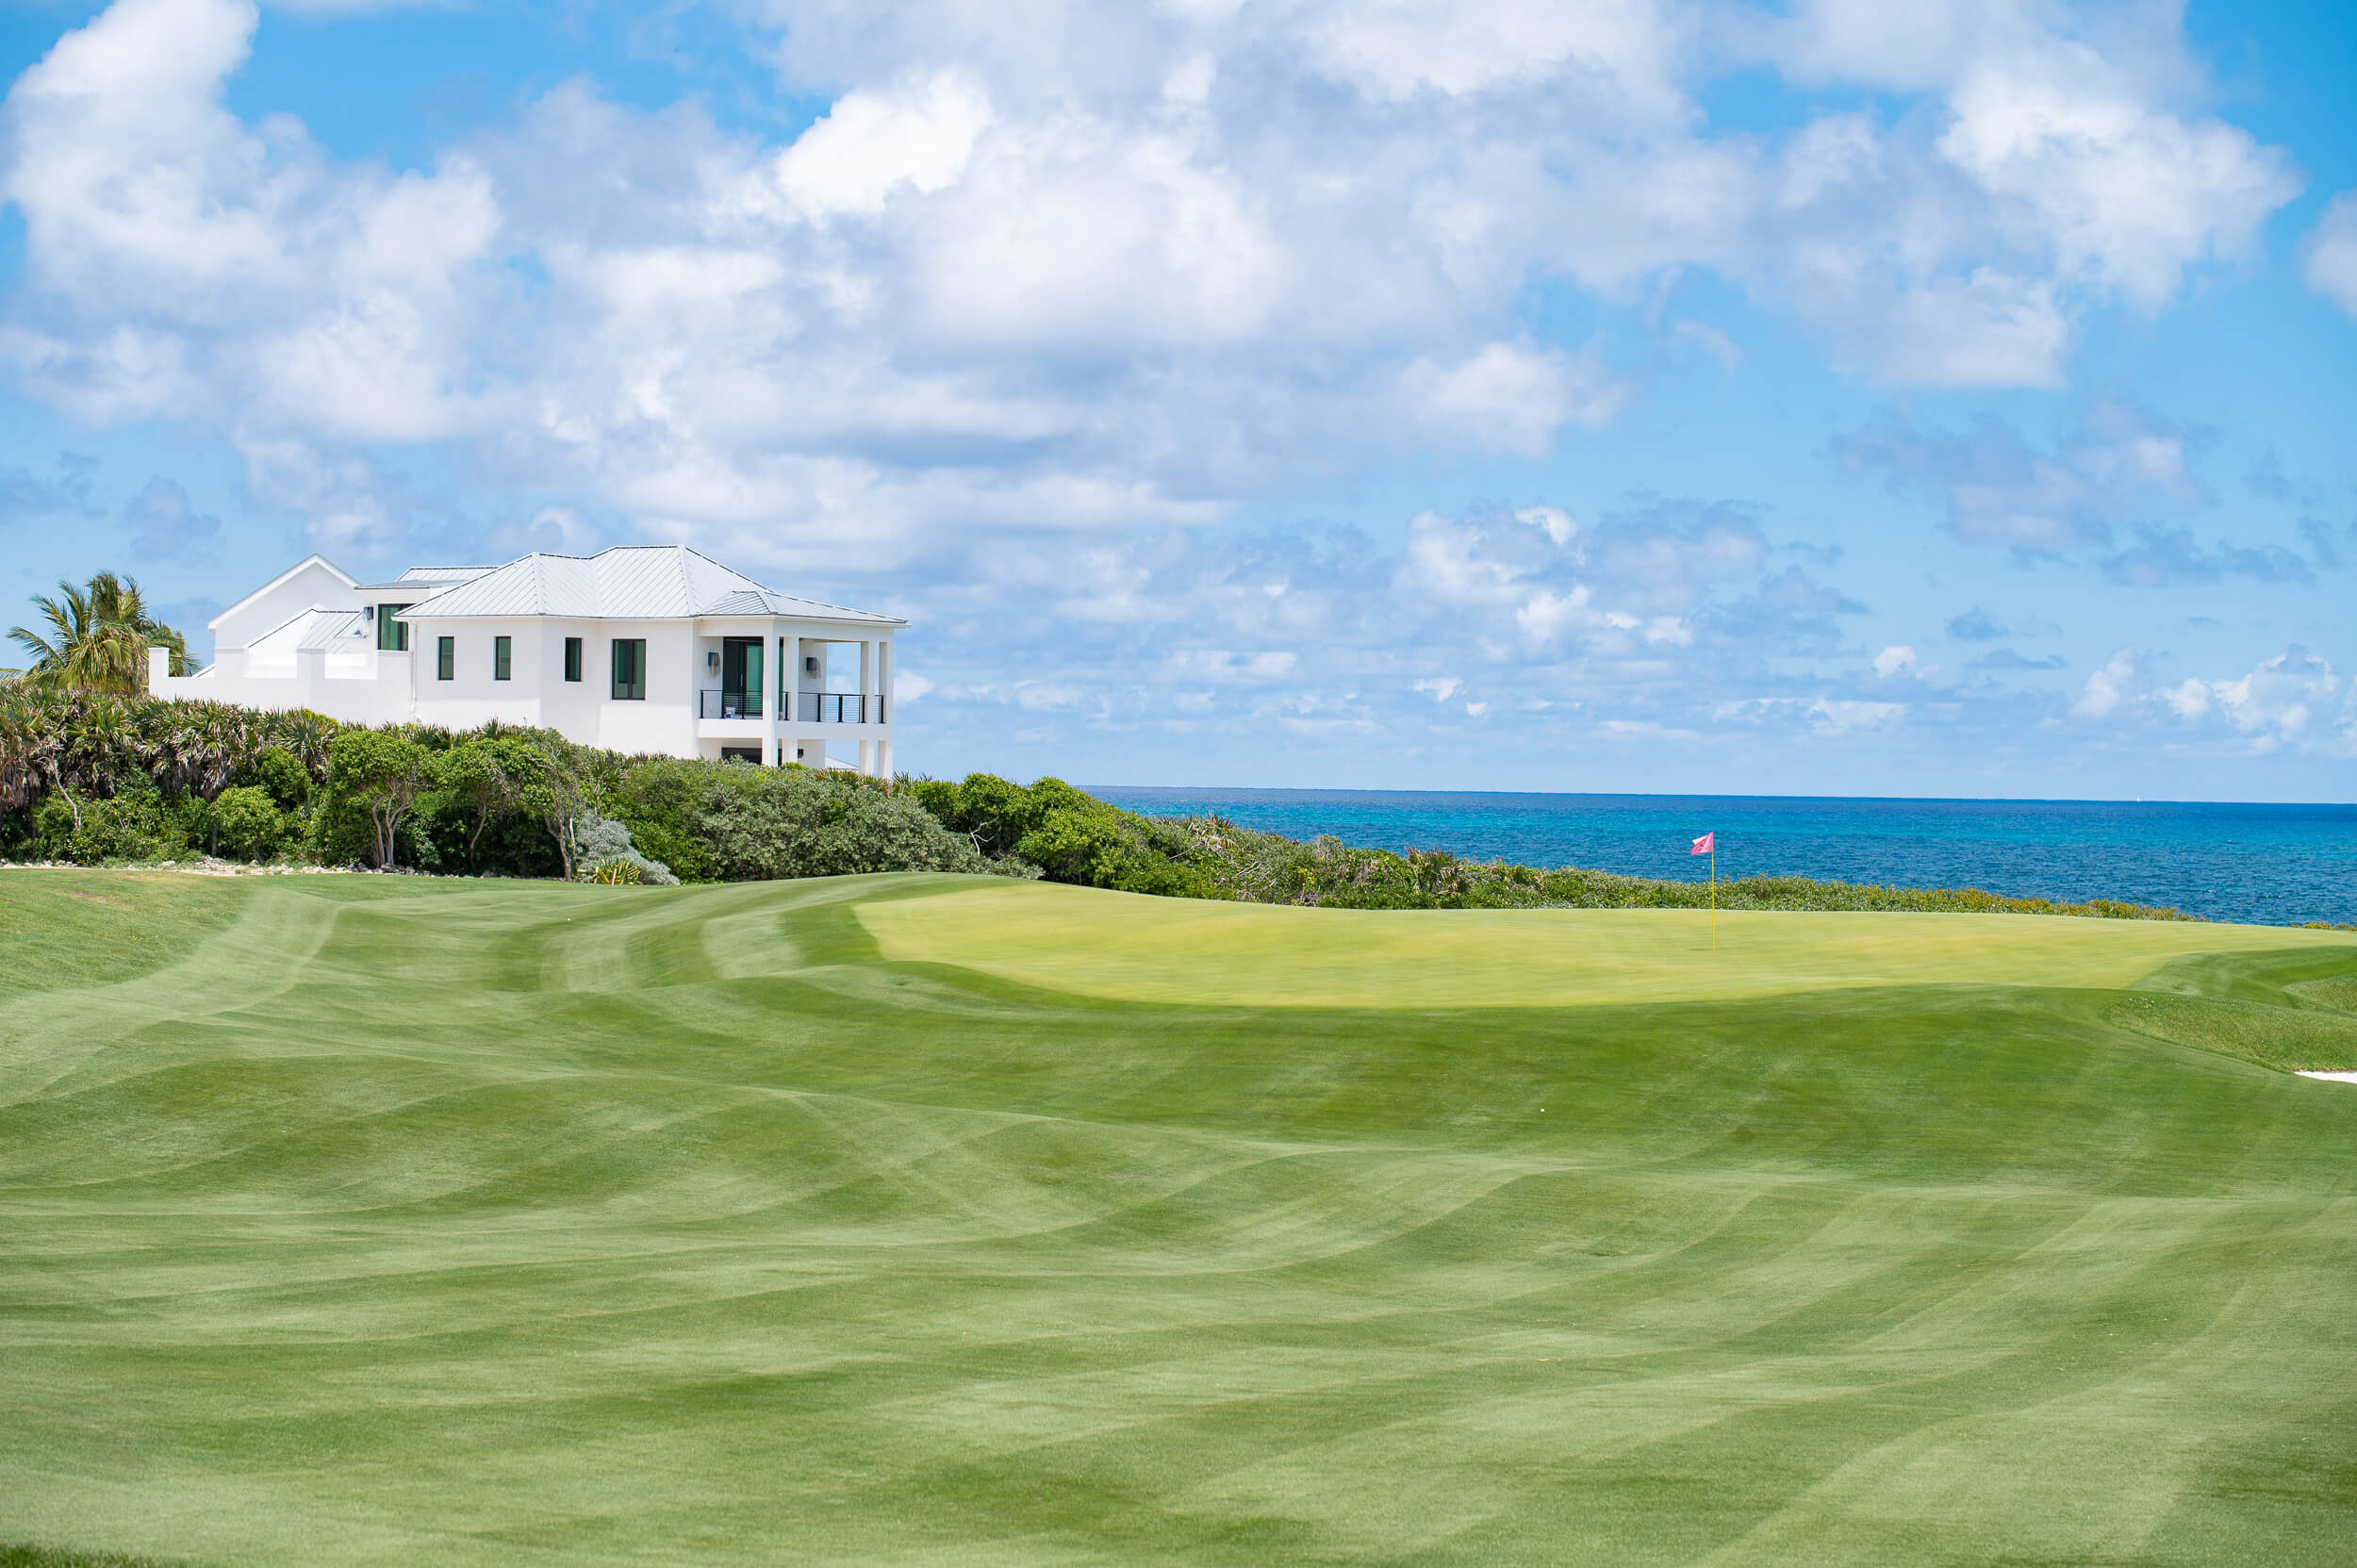 The Abaco Club Golf Course with the ocean on the background